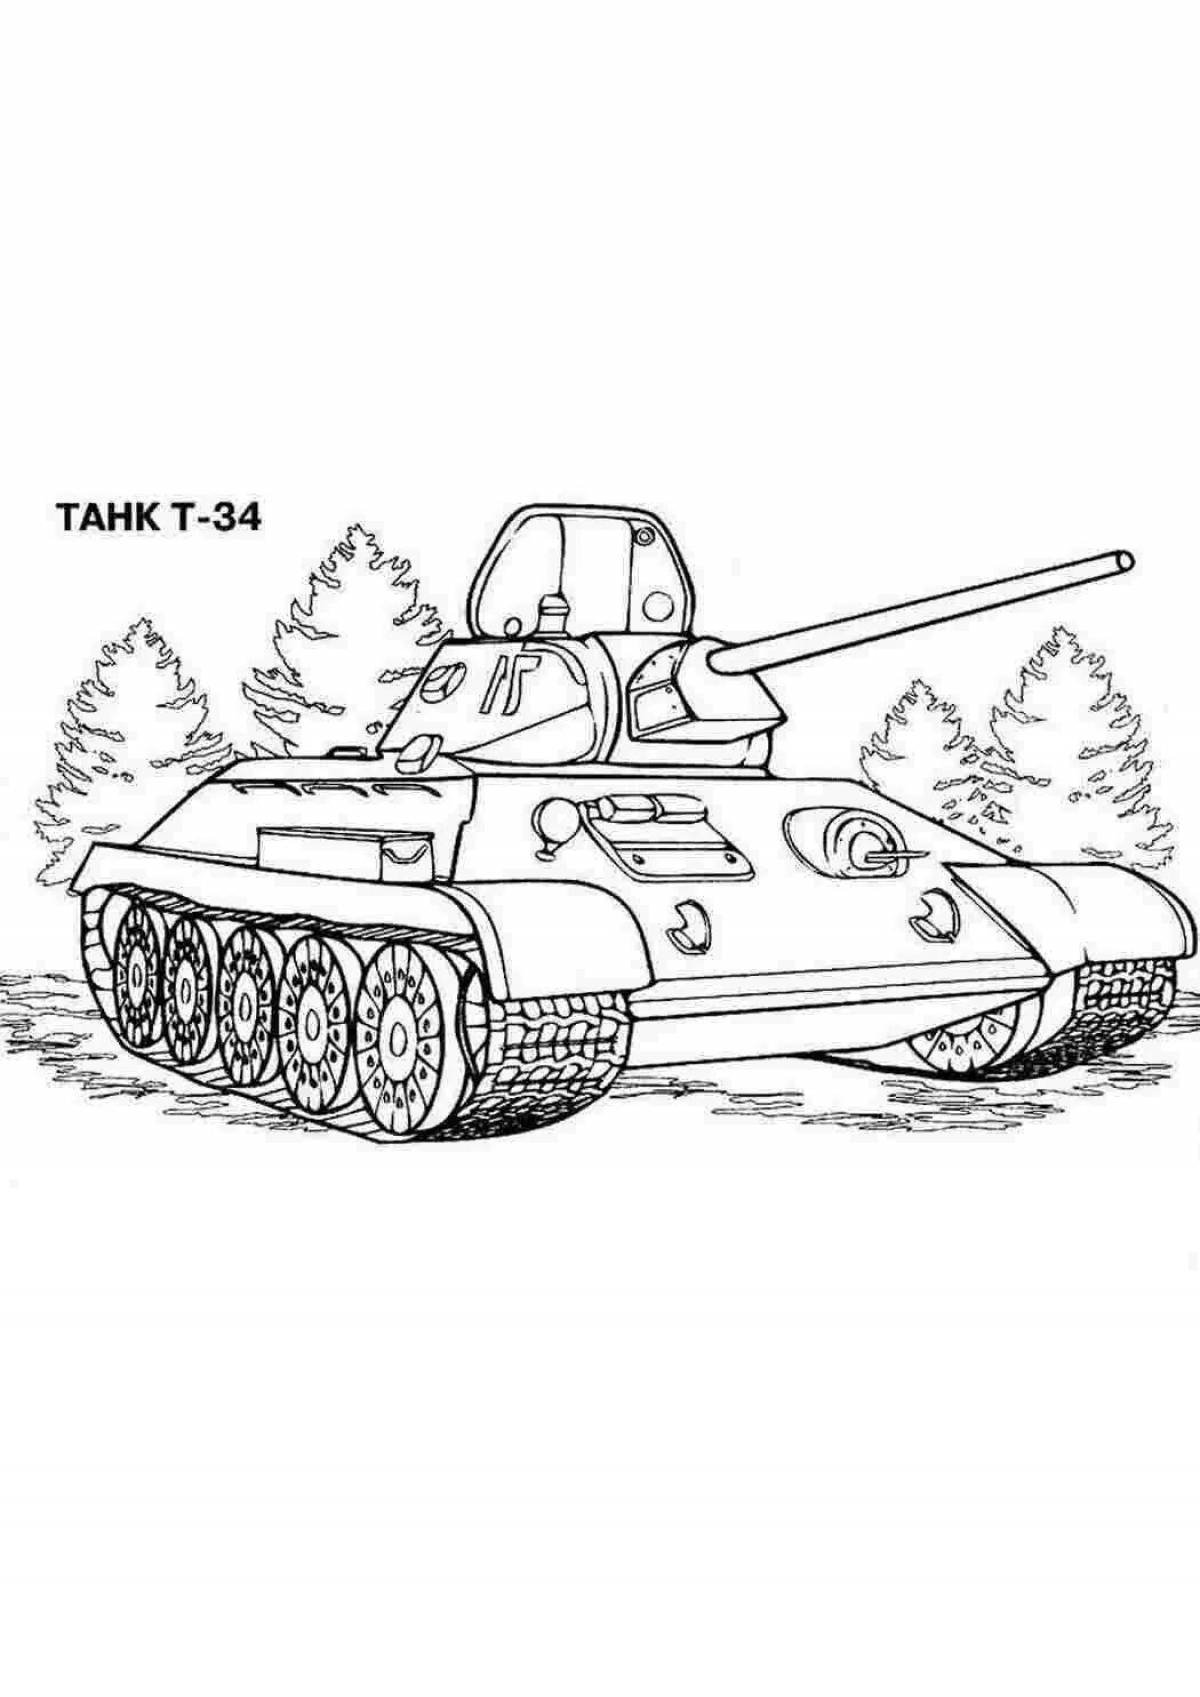 A fascinating coloring of military equipment for schoolchildren